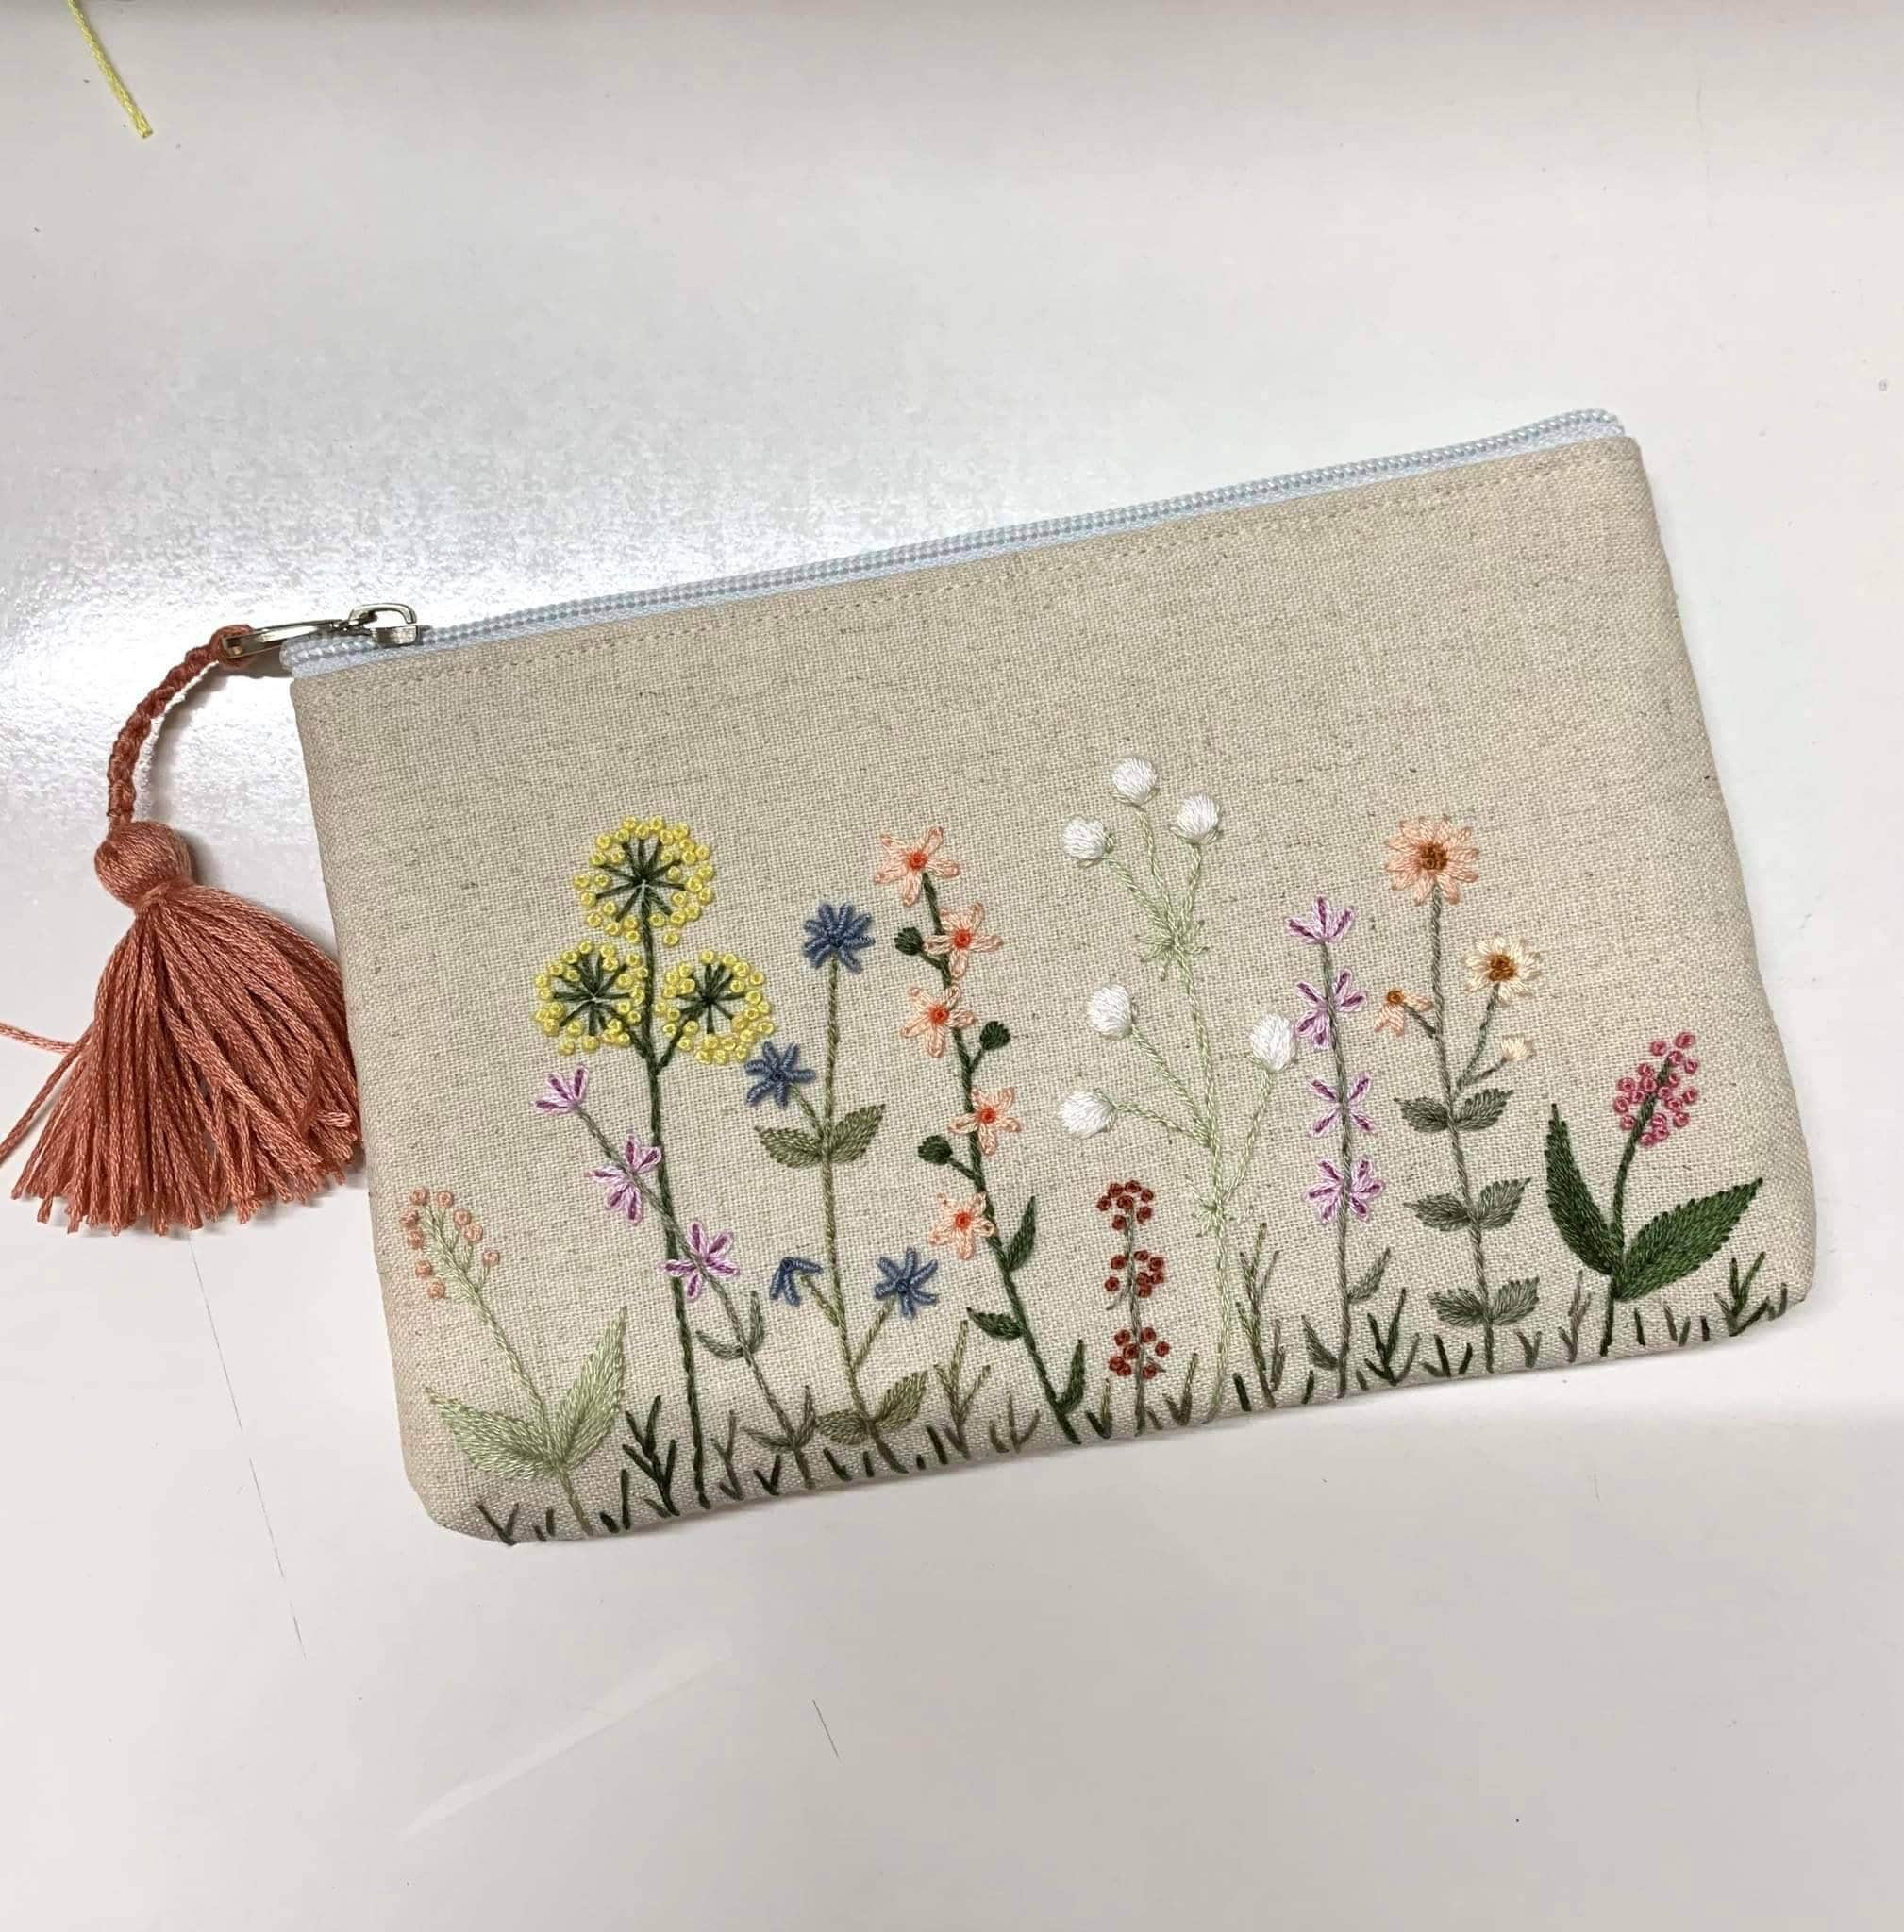 Linen Pochette / Hand Made Embroidery / Natural Cosmetic / Linen Poucz /  Toiletry Bag / Organizer / Linen Cosmetic Bag / Polish Folk Pattern 